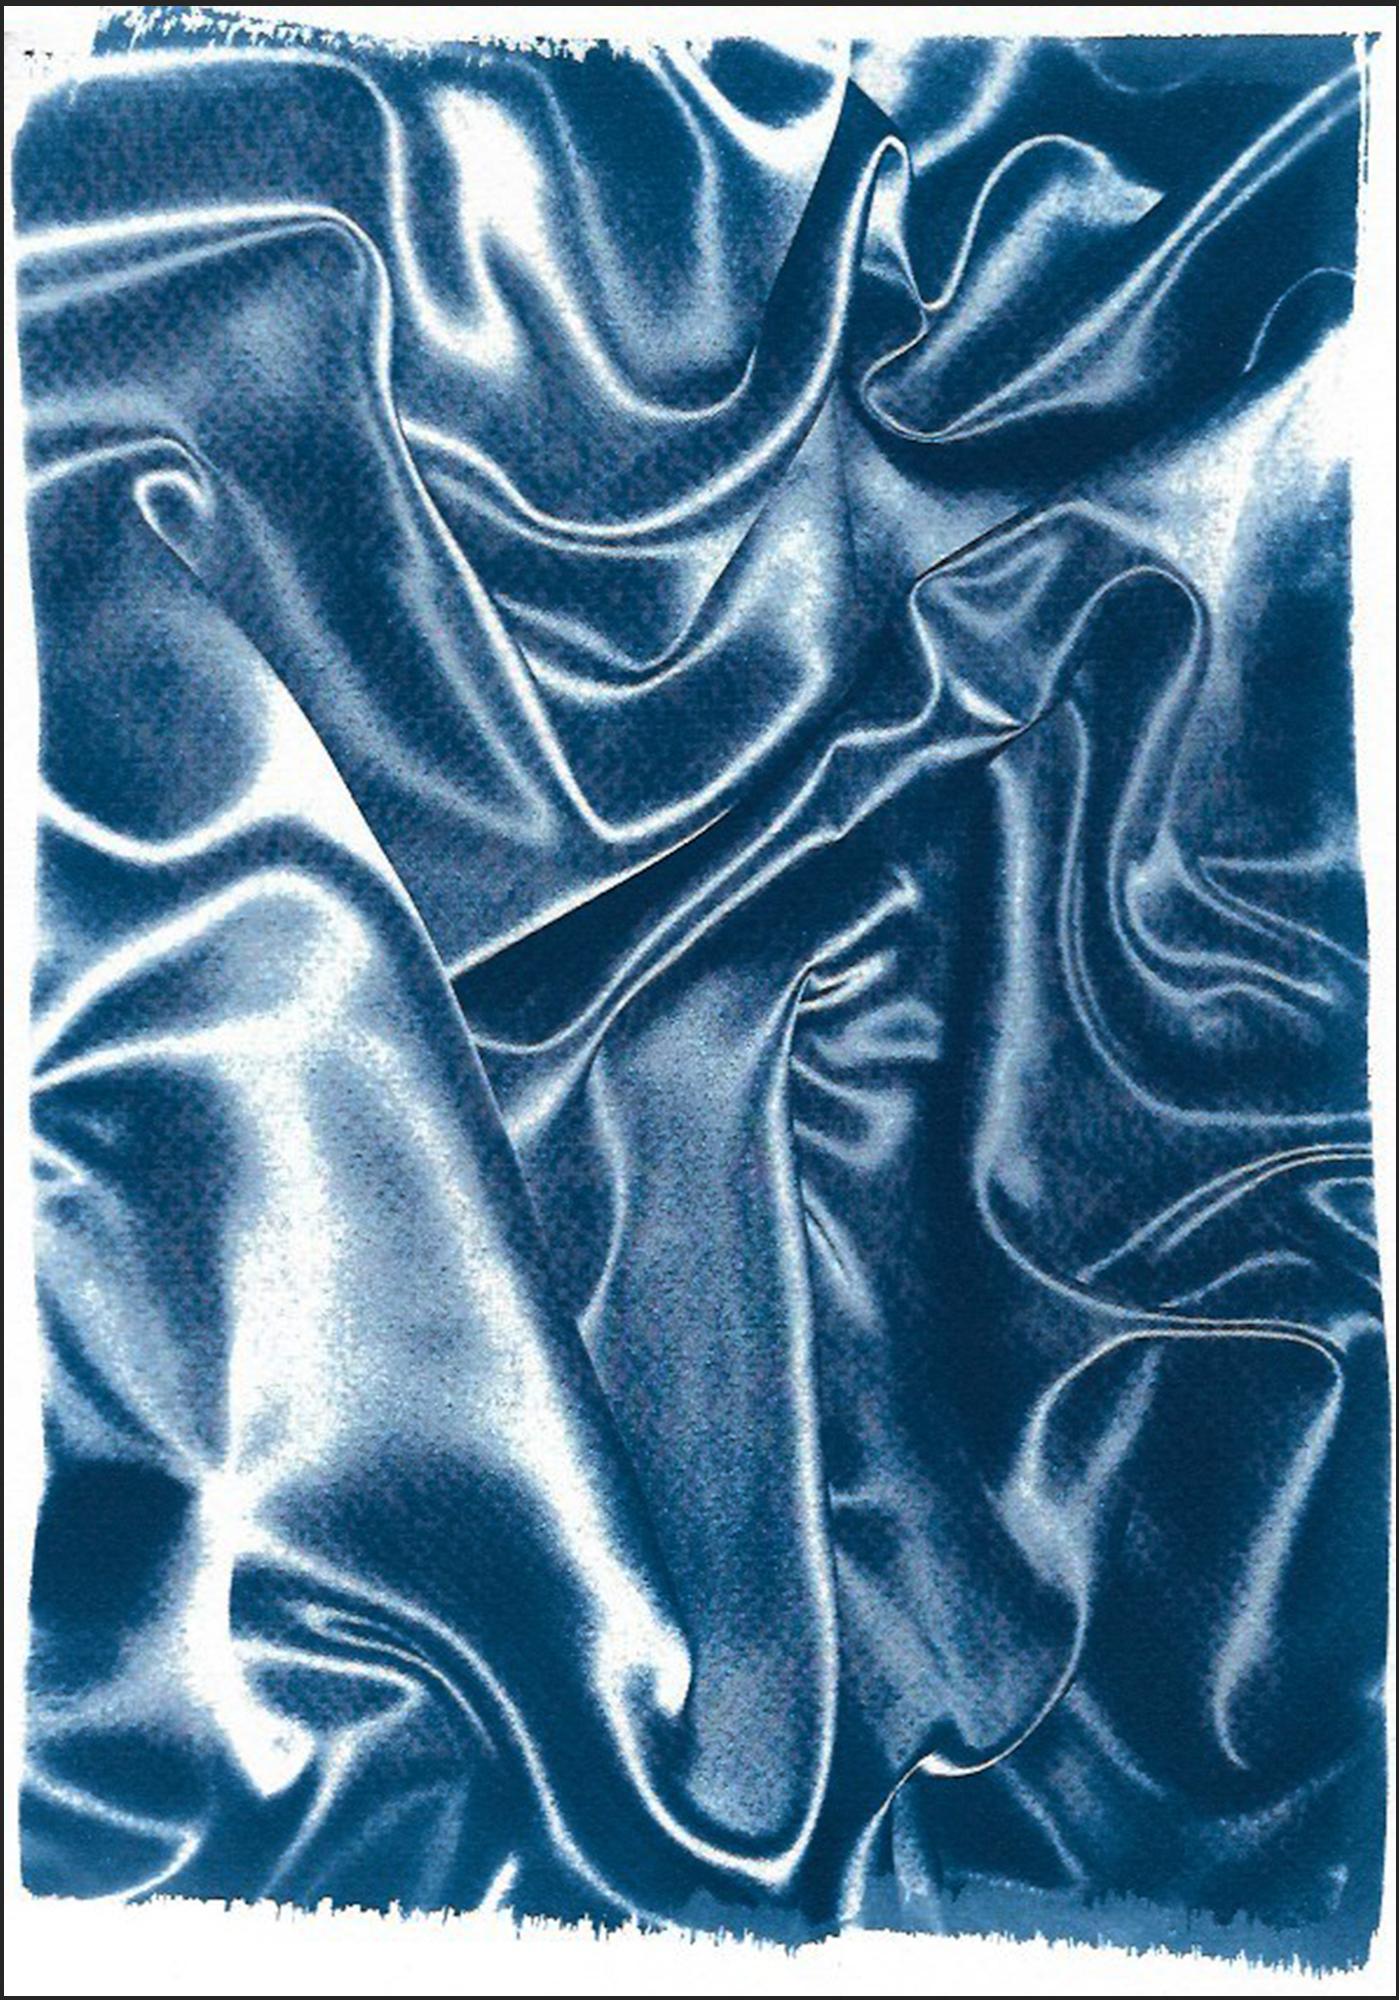 Kind of Cyan Abstract Painting - Classic Blue Silk Movement, Cyanotype on Watercolor Paper, Contemporary Romantic